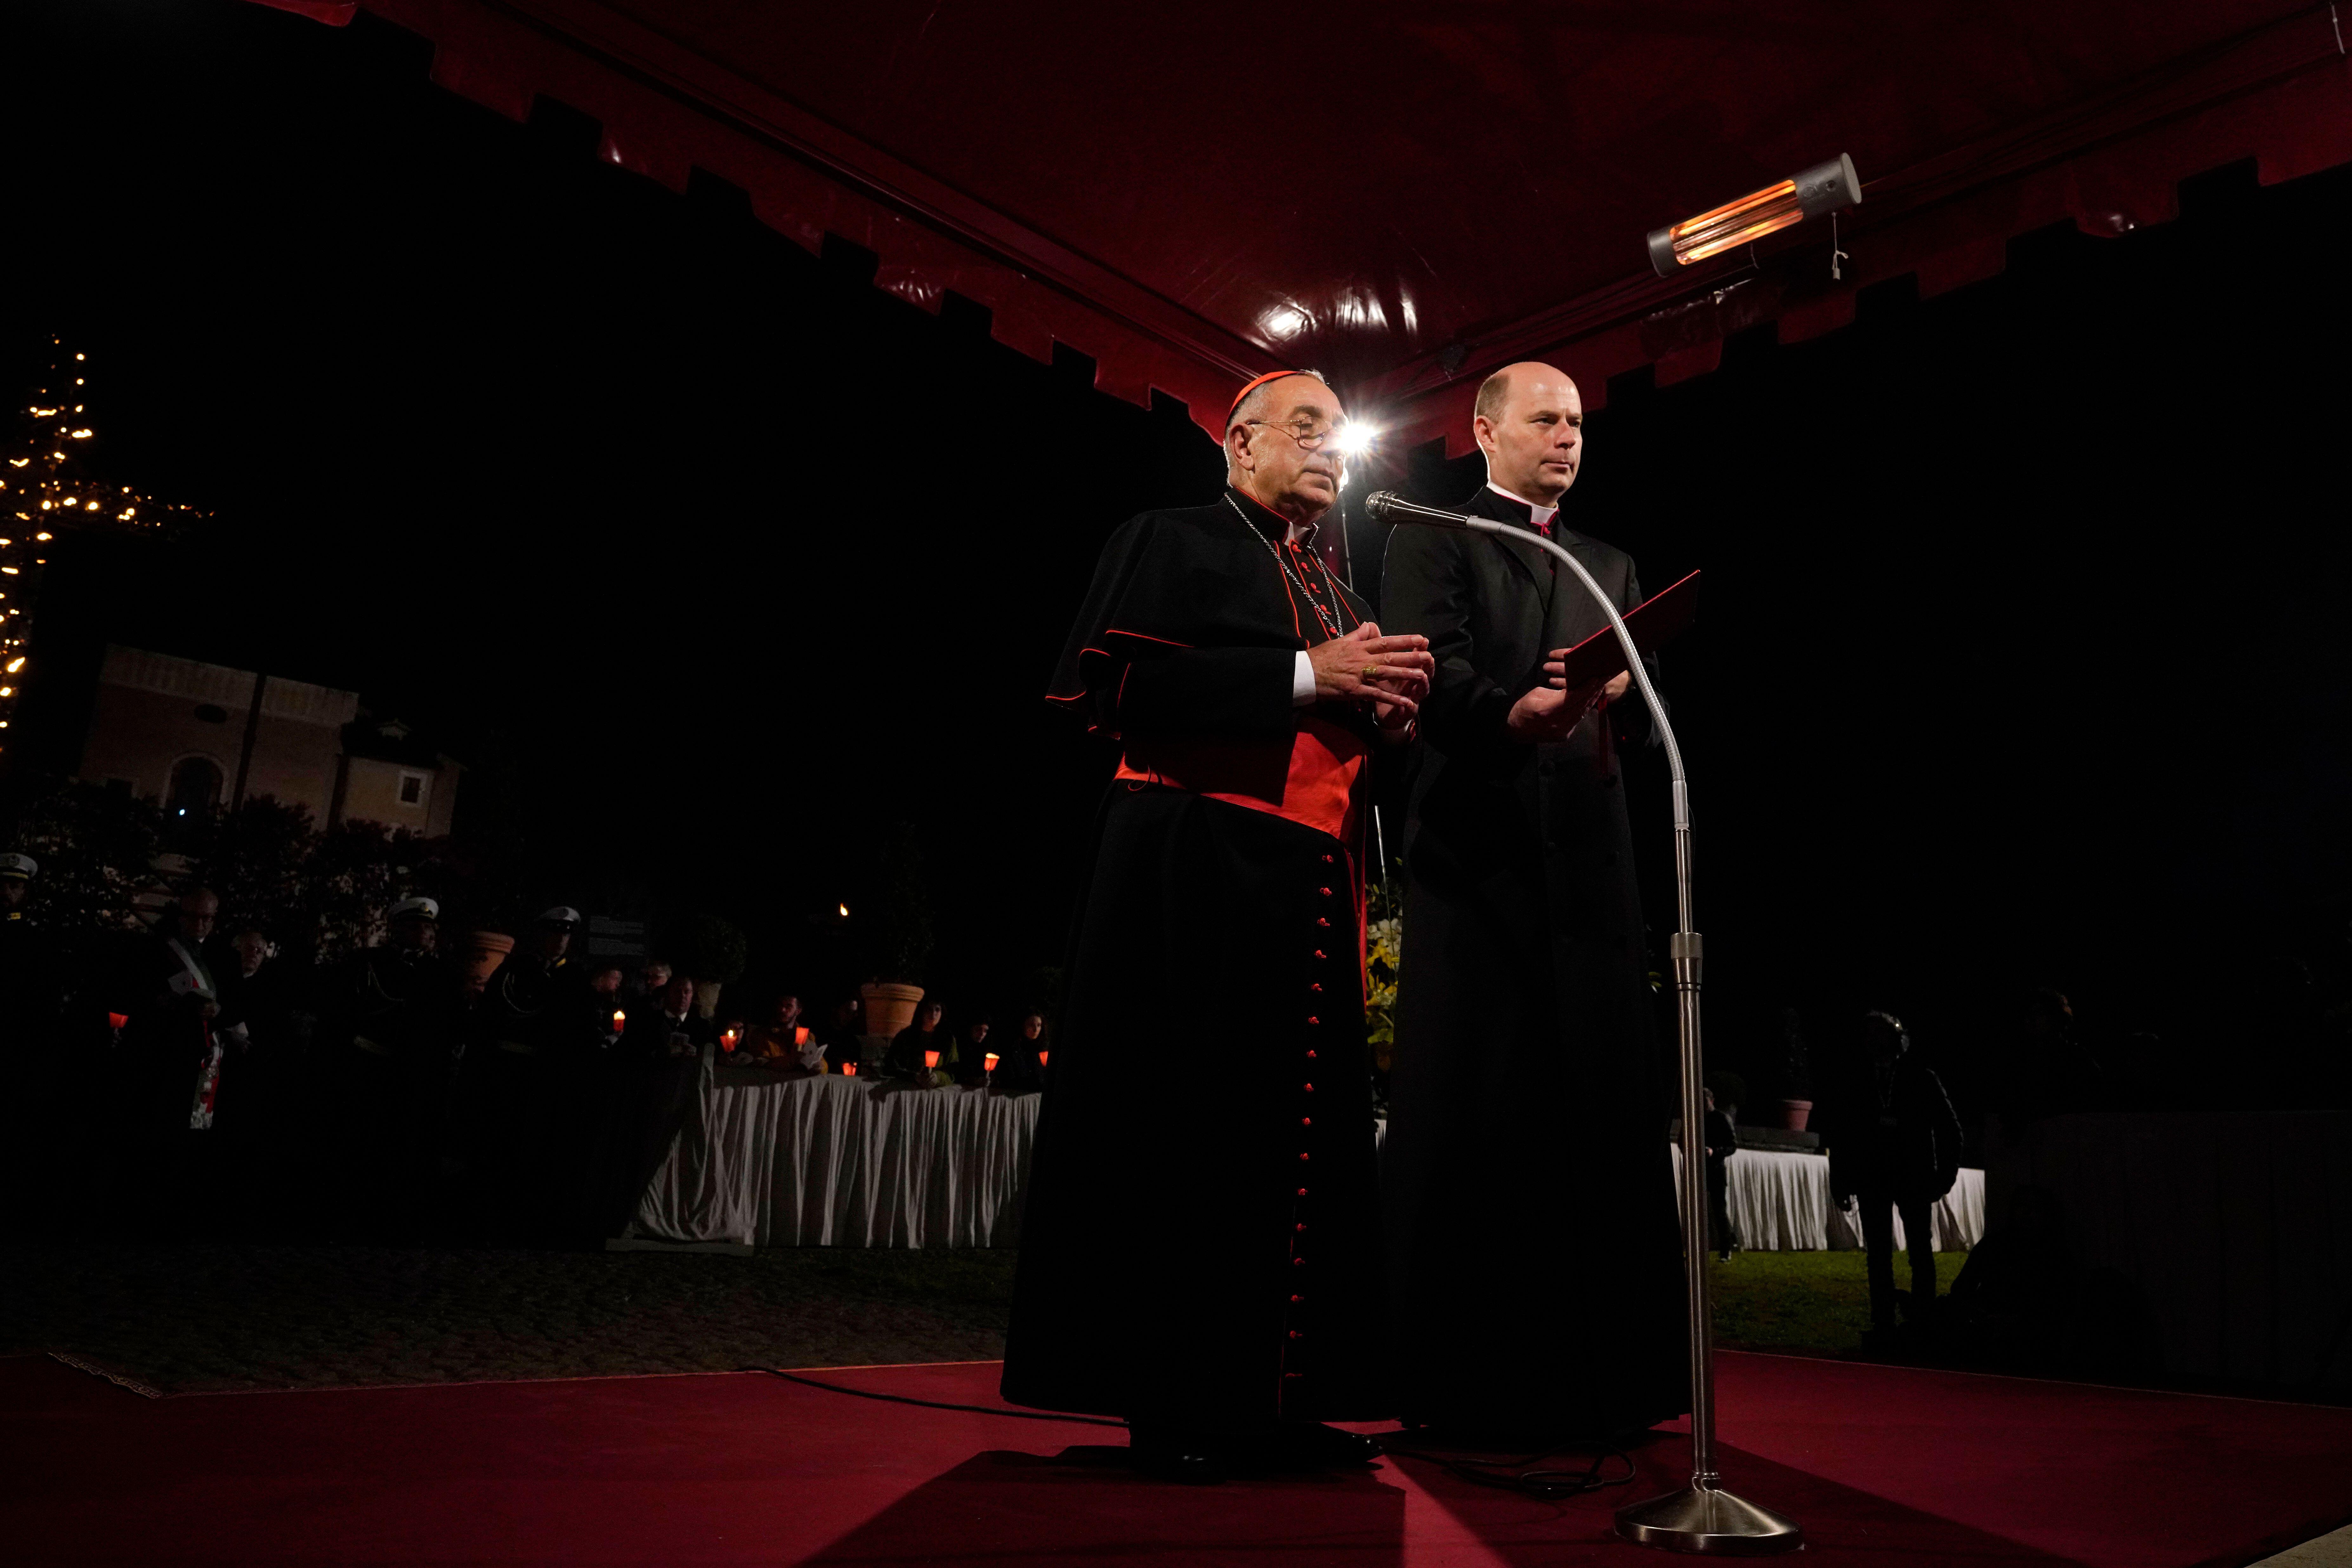 Cardinal De Donatis appointed to ‘tribunal of mercy’